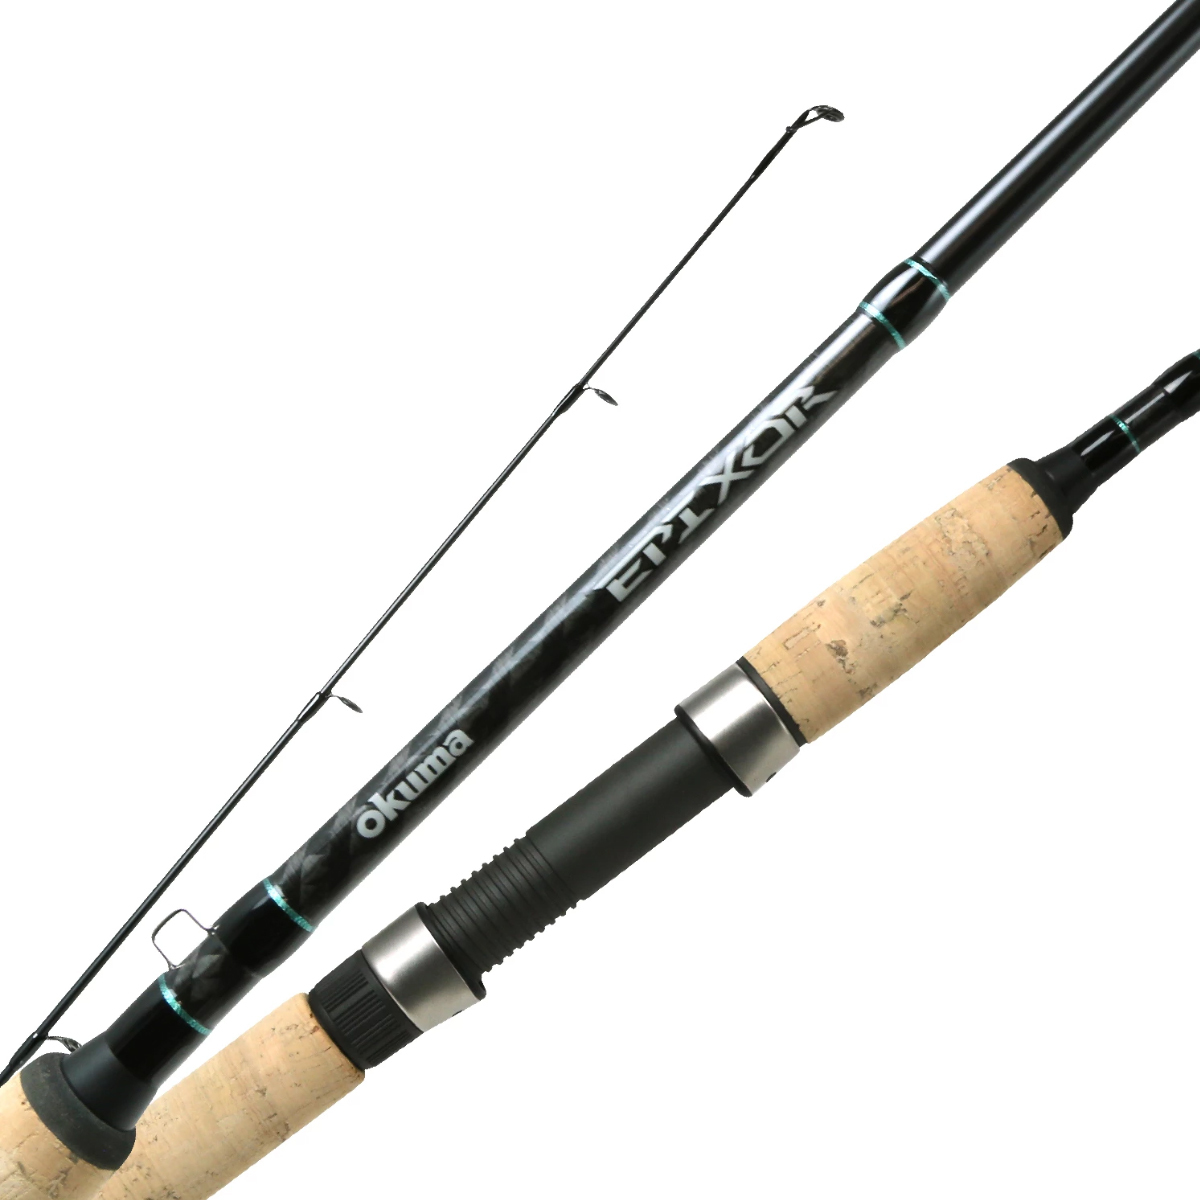 https://op1.0ps.us/original/opplanet-okuma-epixor-spinning-rod-1-piece-heavy-24-ton-carbon-rod-blanks-fultra-lightl-cork-fore-and-rear-grips-with-fuji-trigger-reel-seat-7-epi-s-701h-main